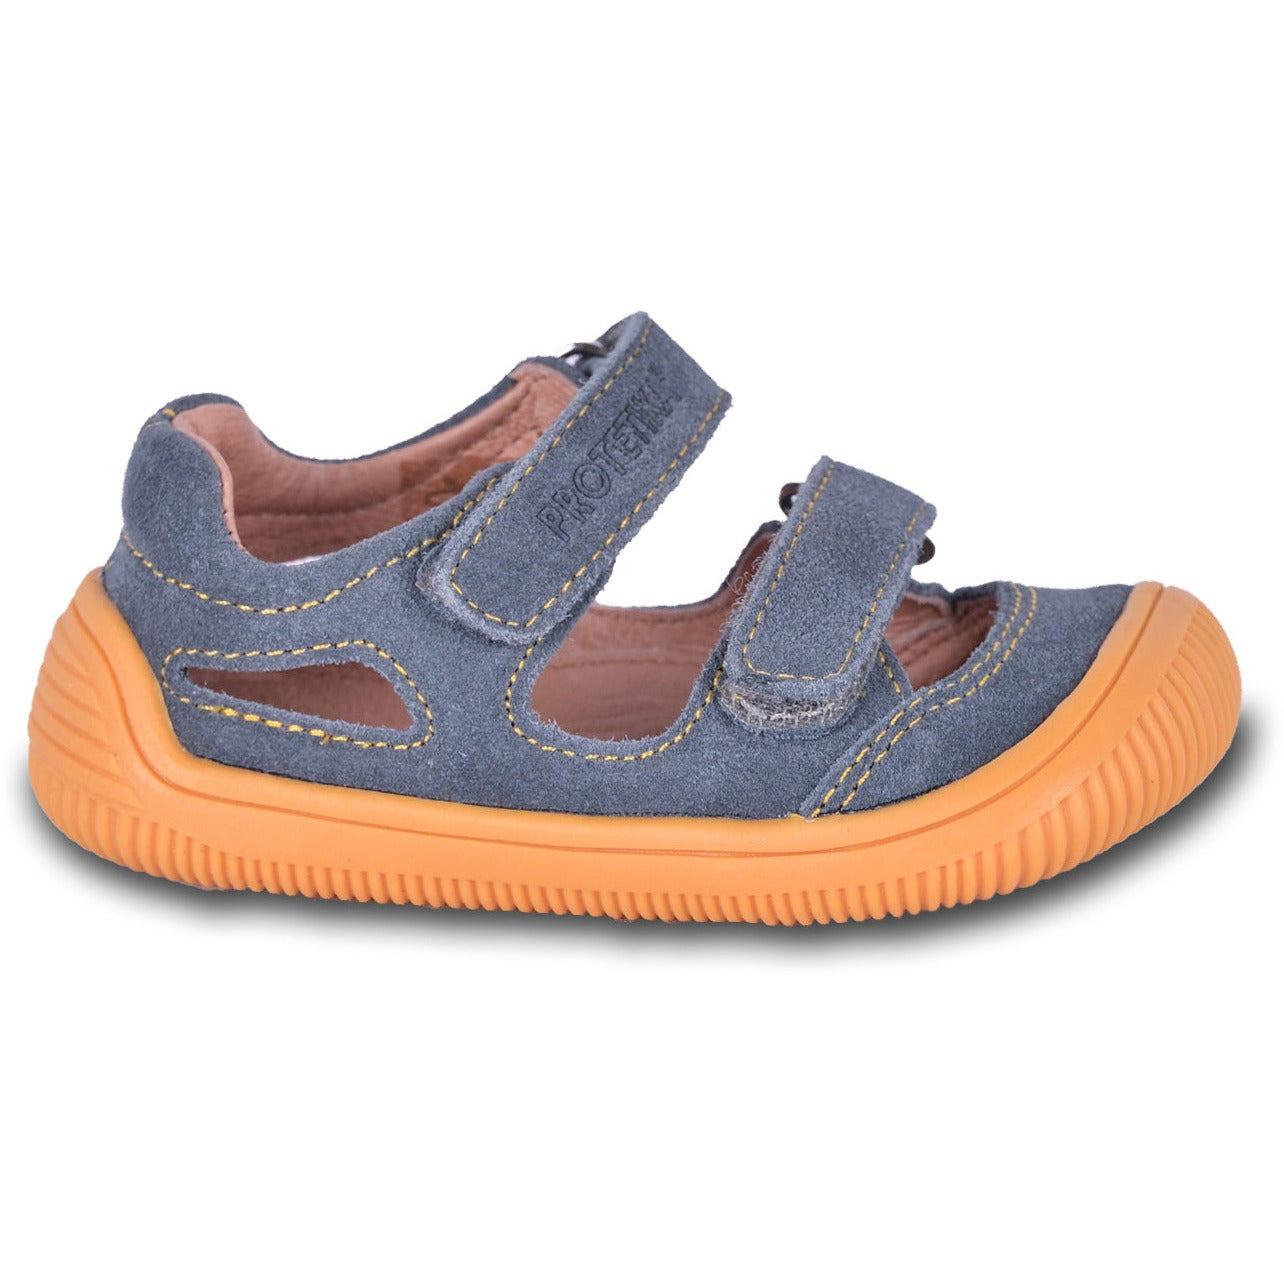 Toddler boy barefoot sneakers with a thin and flexible sole are a great option for an active first walker who spends time on natural surfaces, feeling the unevenness of the ground.